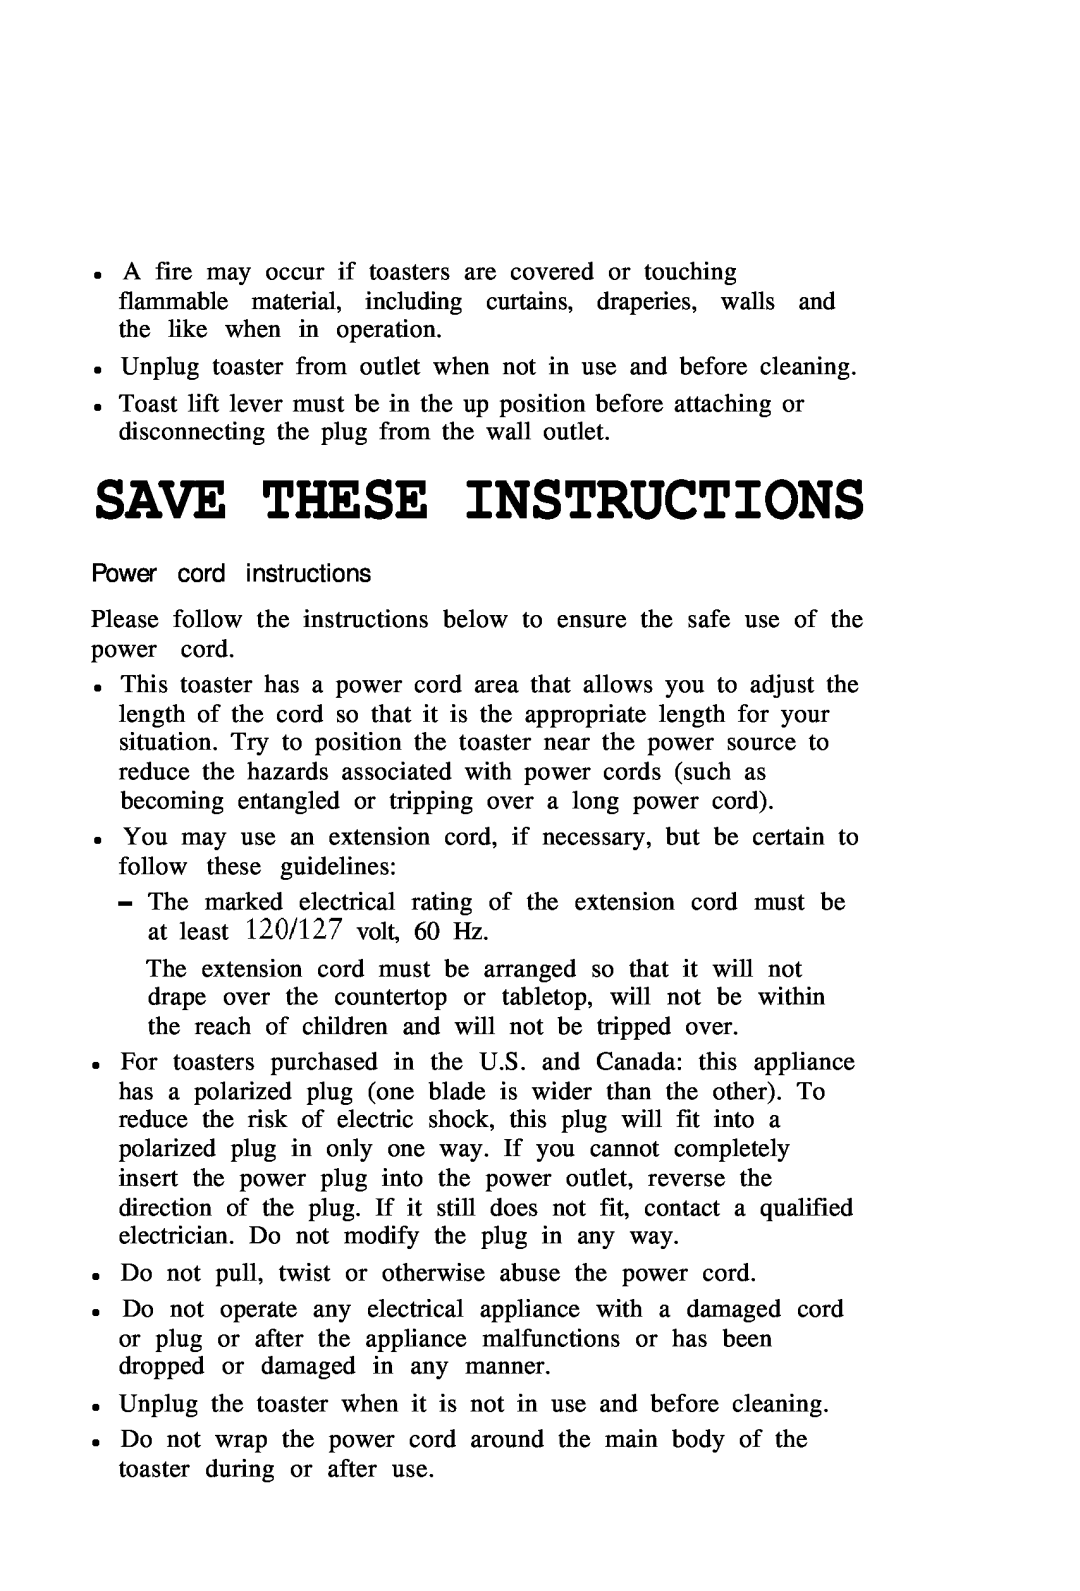 Sunbeam 6220 manual Power cord instructions, Save These Instructions 